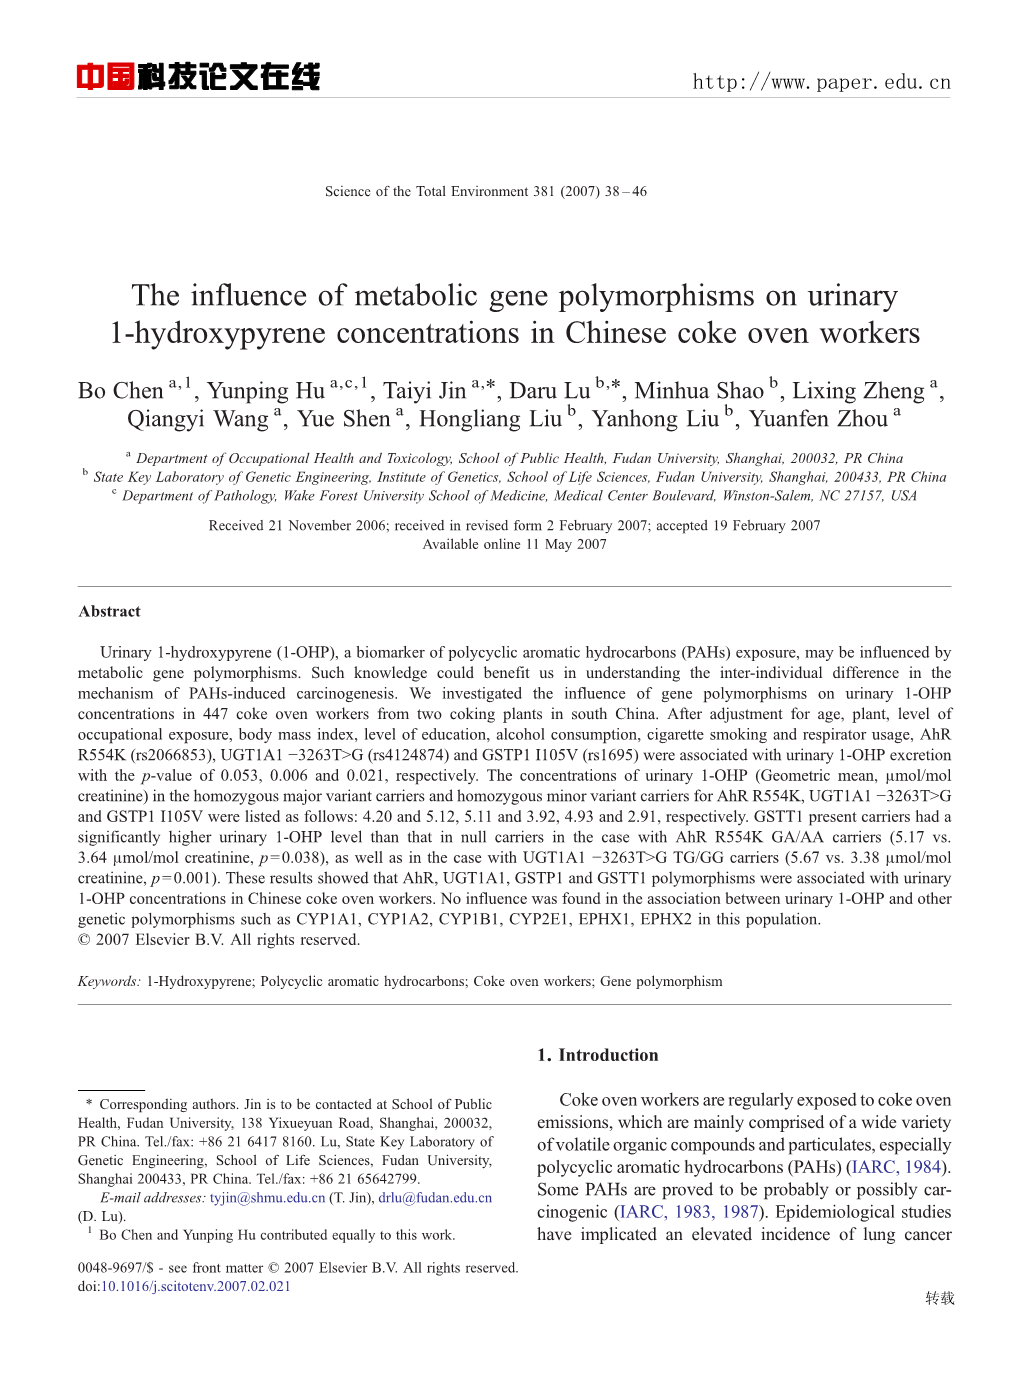 The Influence of Metabolic Gene Polymorphisms on Urinary 1